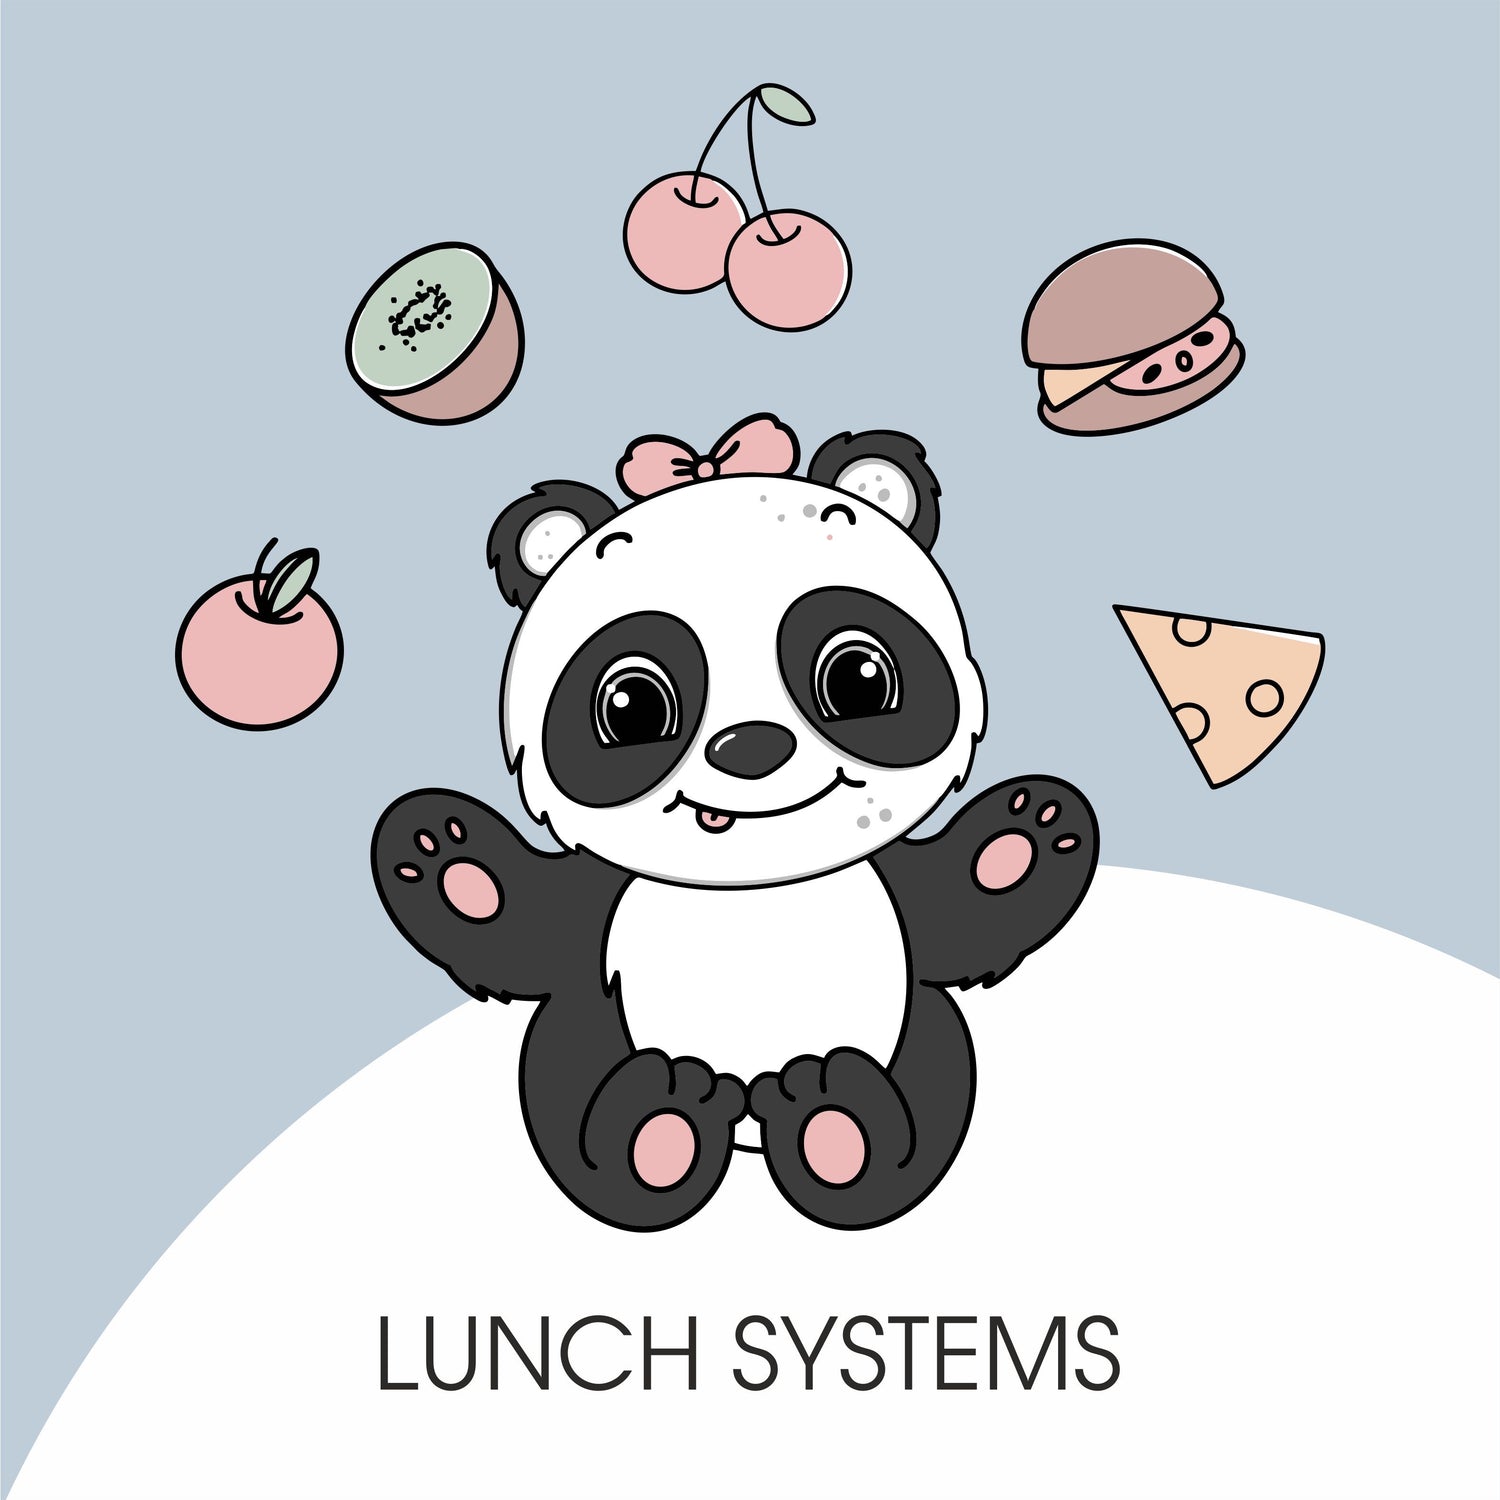 LUNCH SYSTEMS